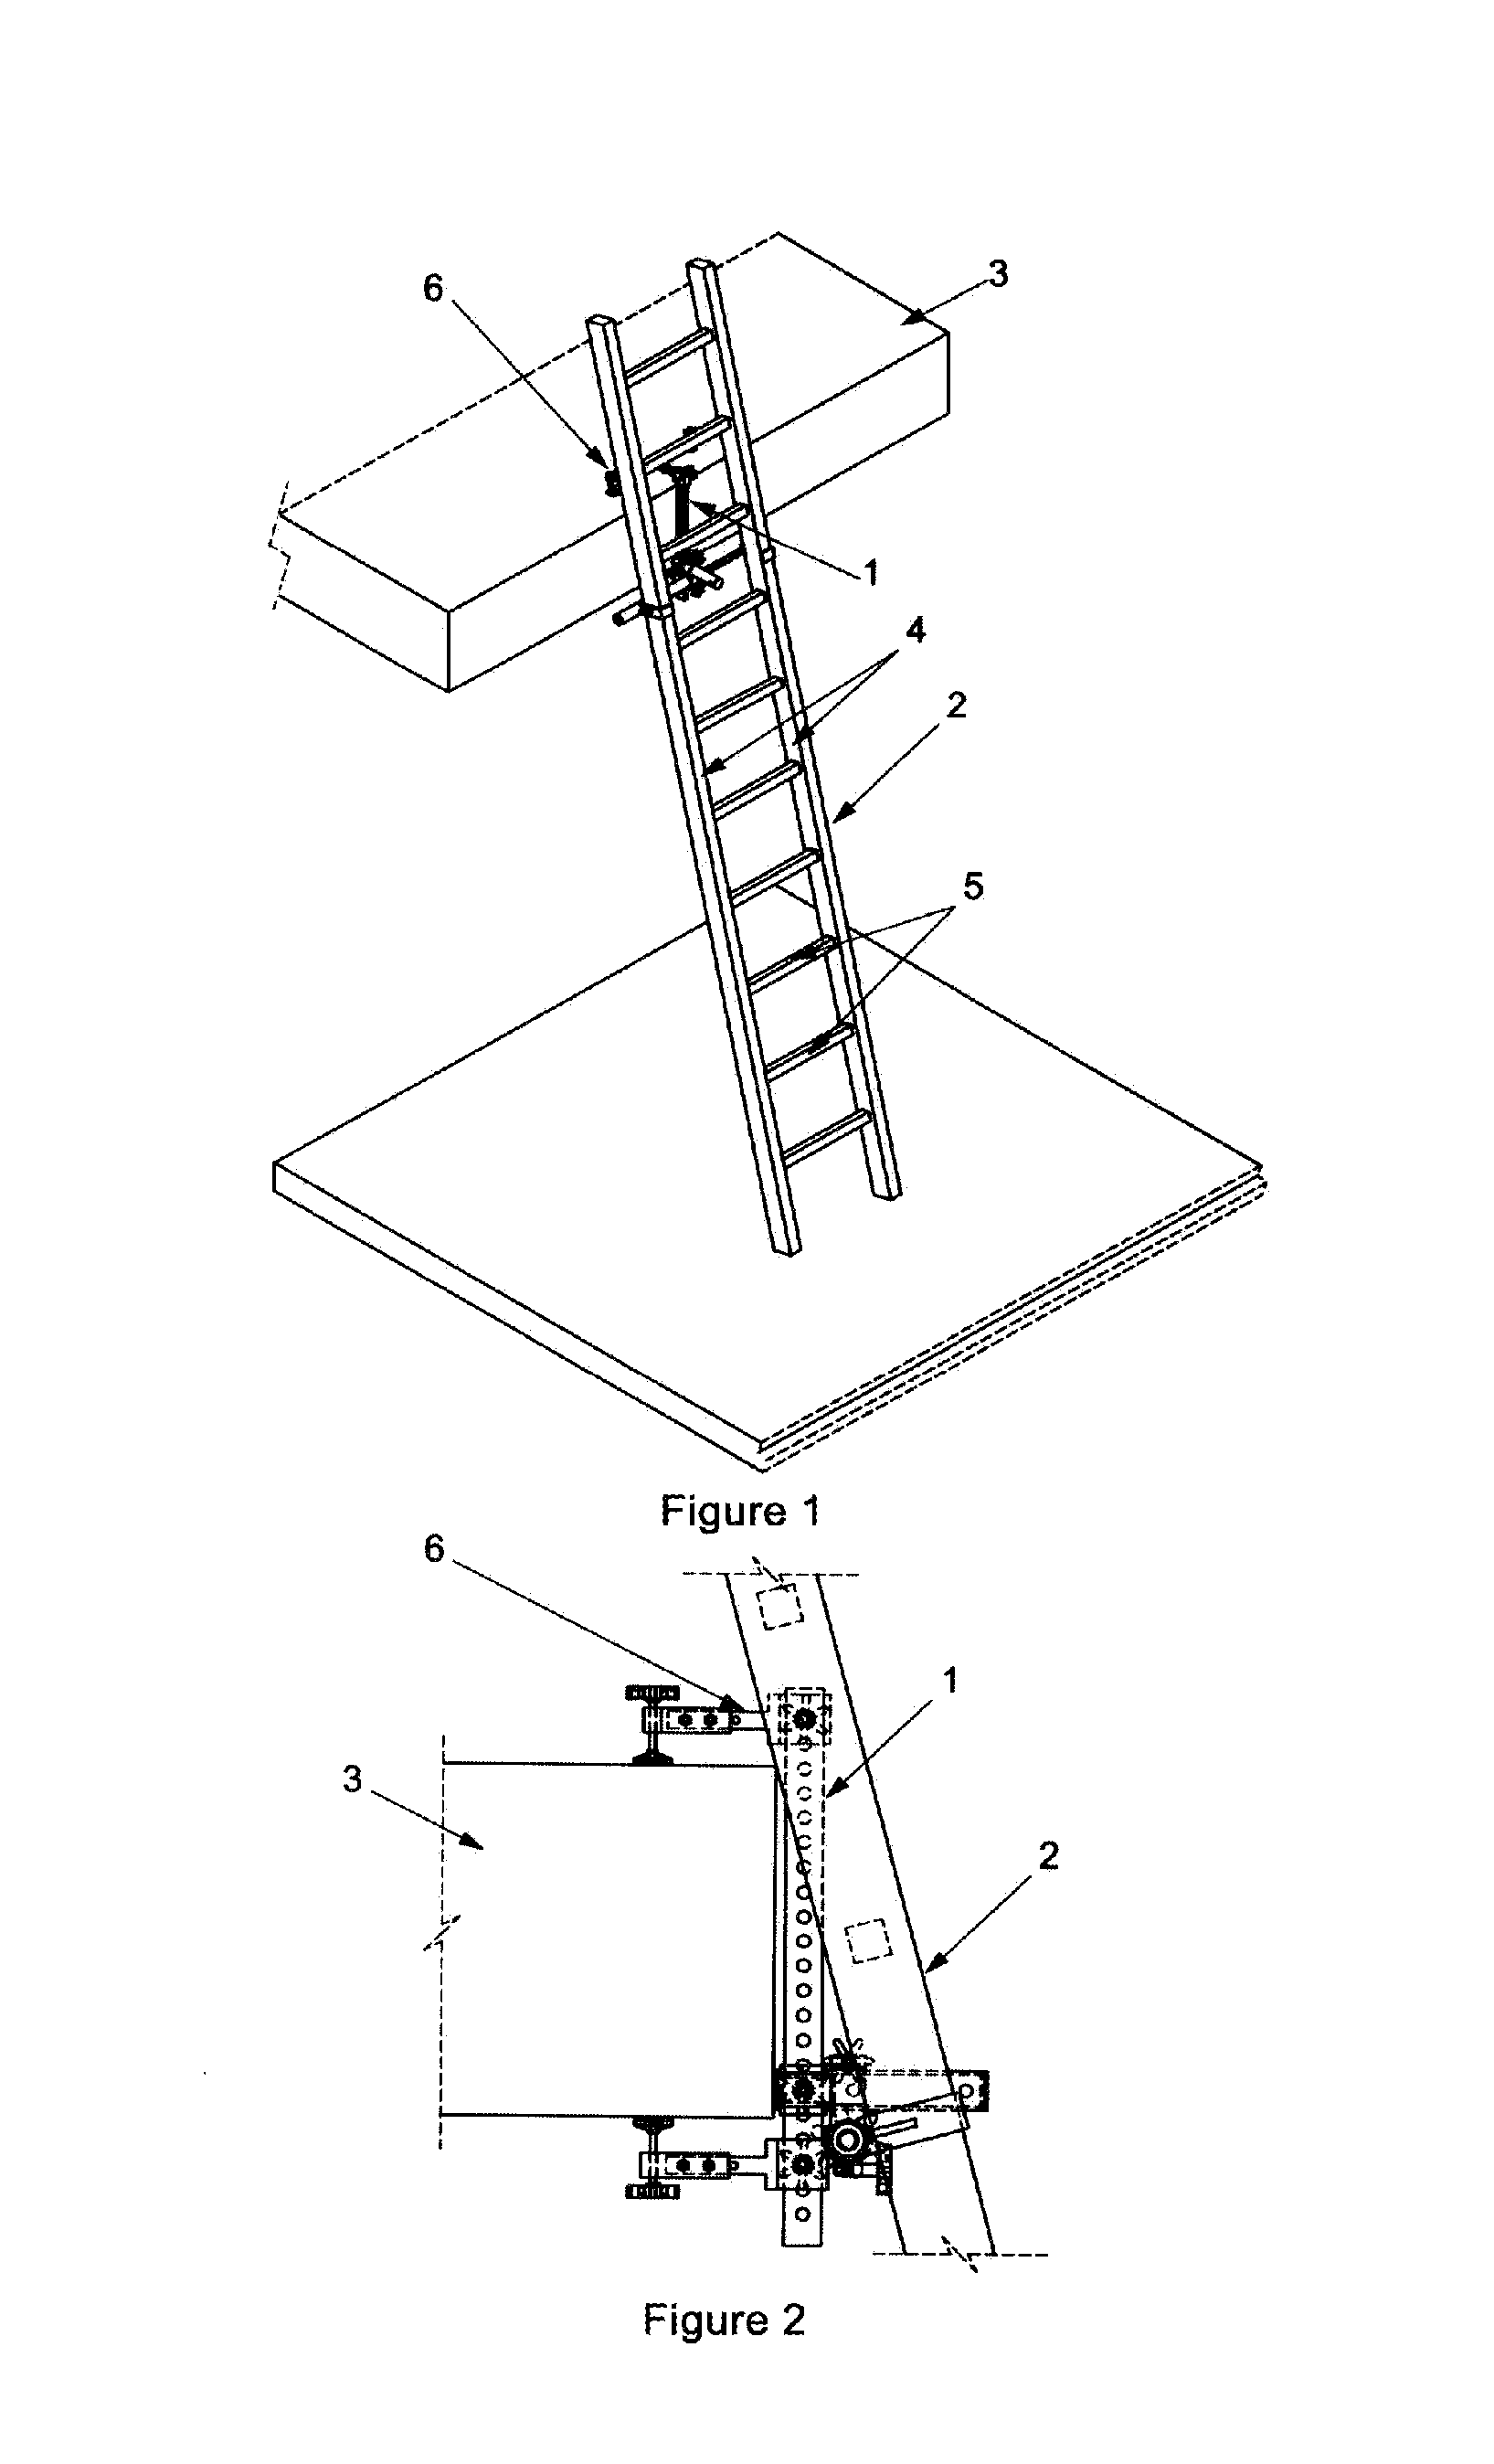 Multi-Orientable Device for Securing Portable Steps